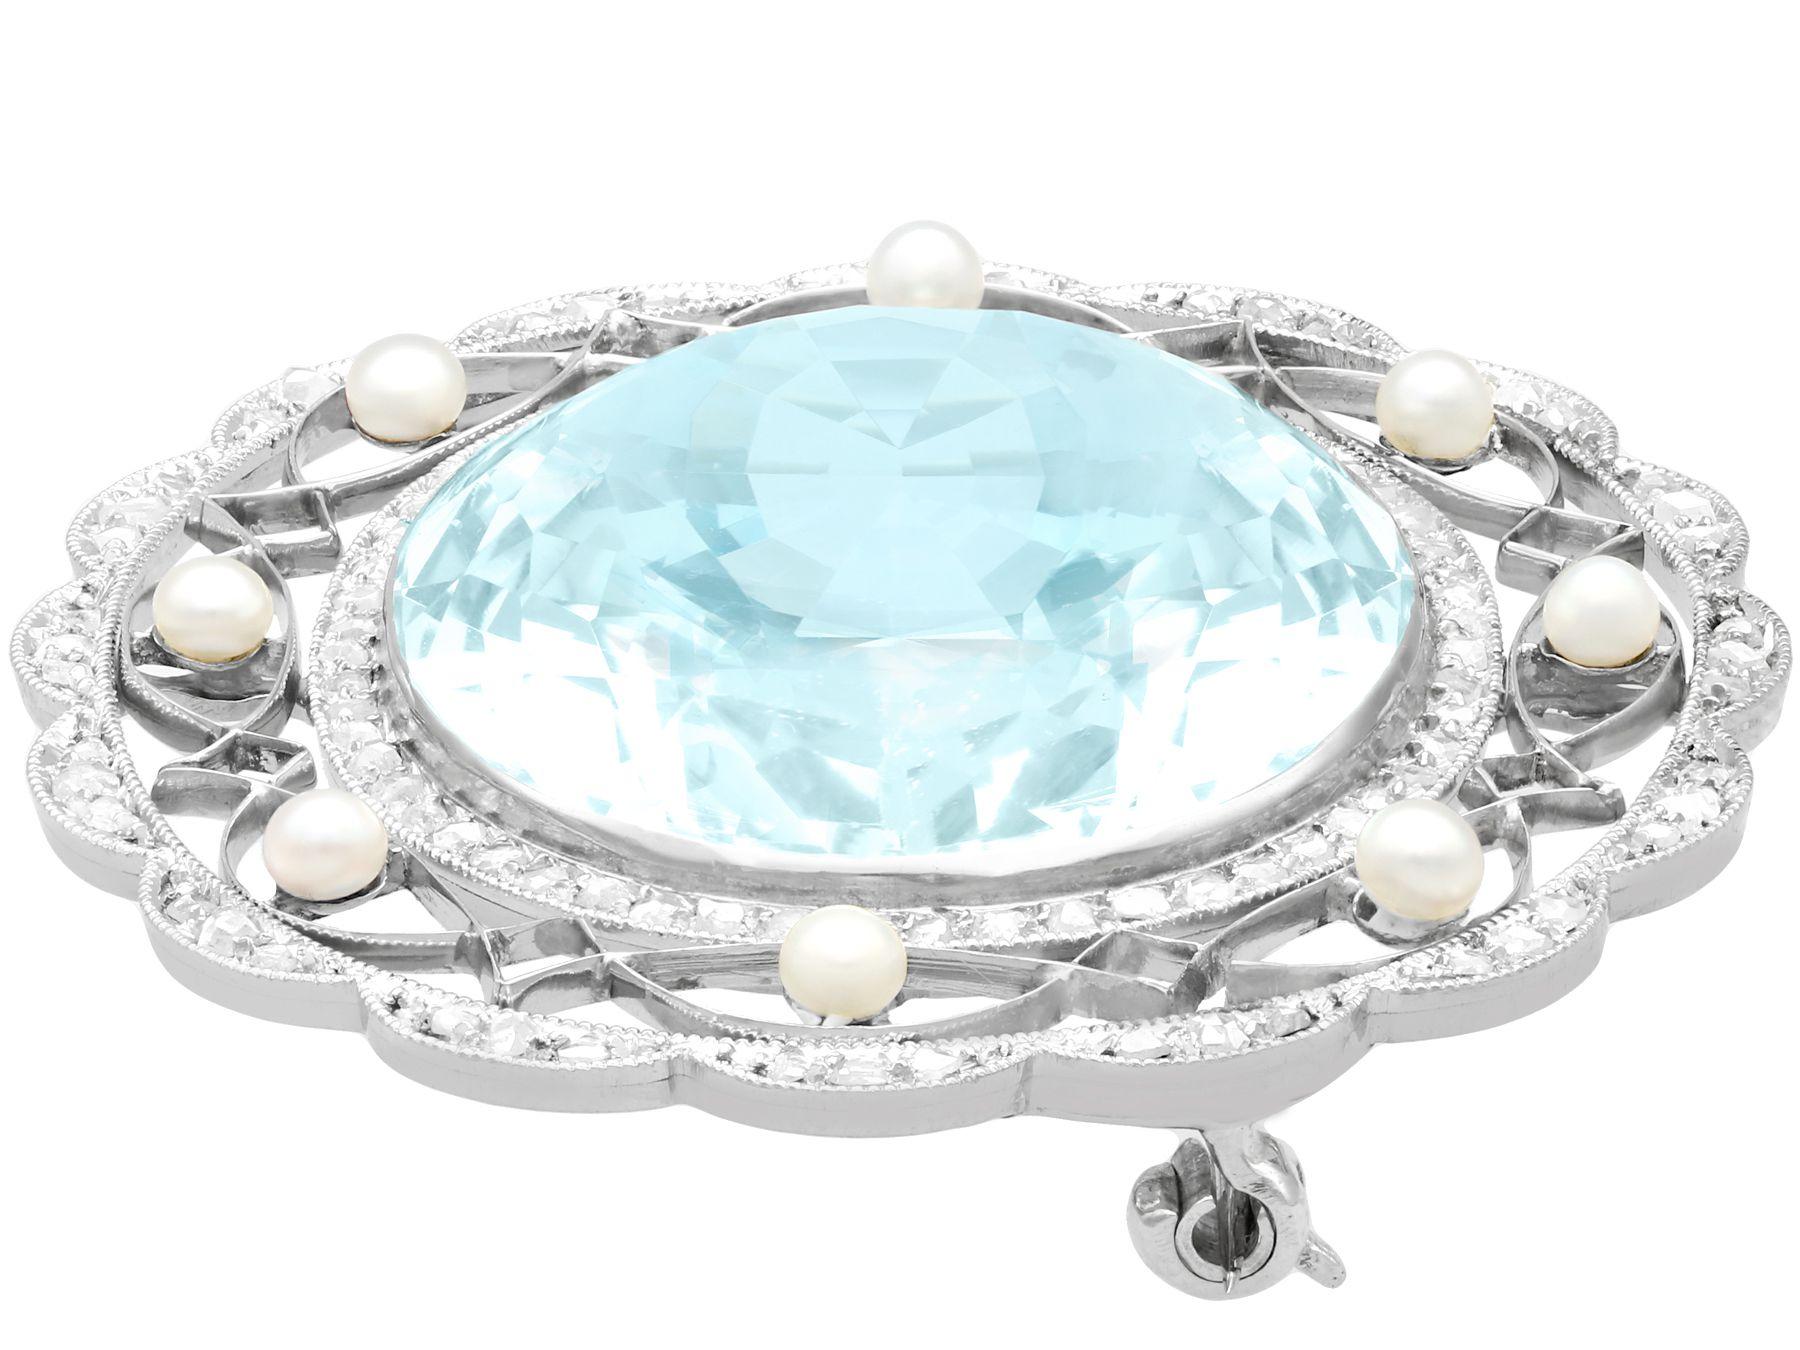 Edwardian 43.84 Carat Aquamarine Diamond and Pearl Brooch in Platinum In Excellent Condition For Sale In Jesmond, Newcastle Upon Tyne